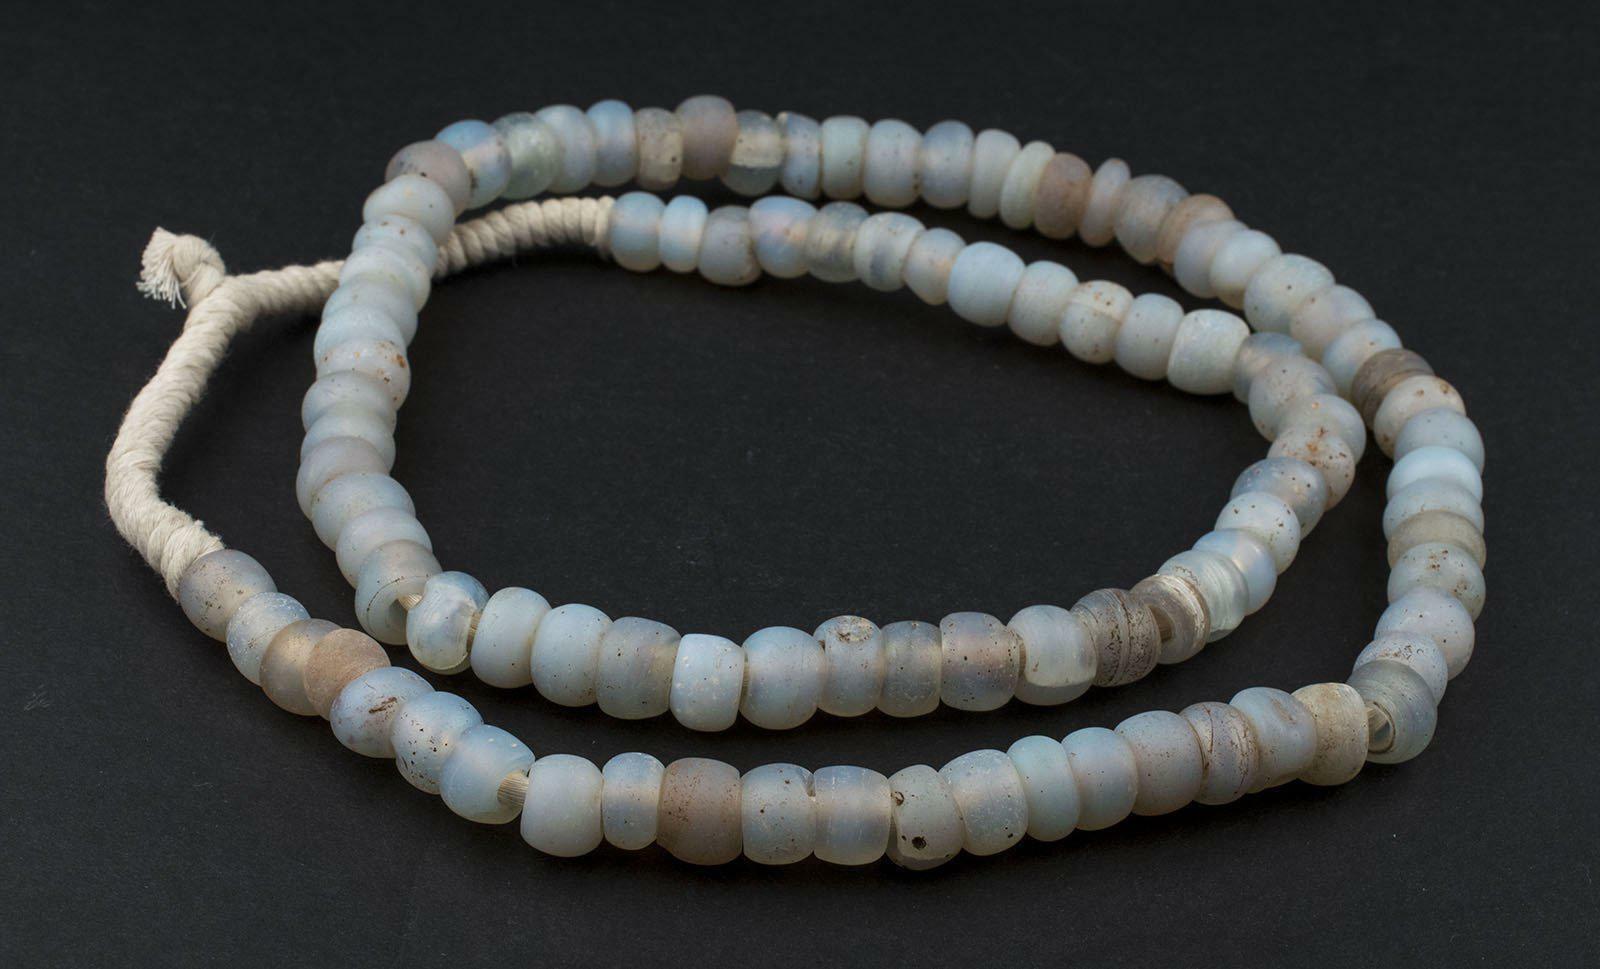 Antique Moon Beads from Ethiopia 13mm African White Round Glass Large Hole